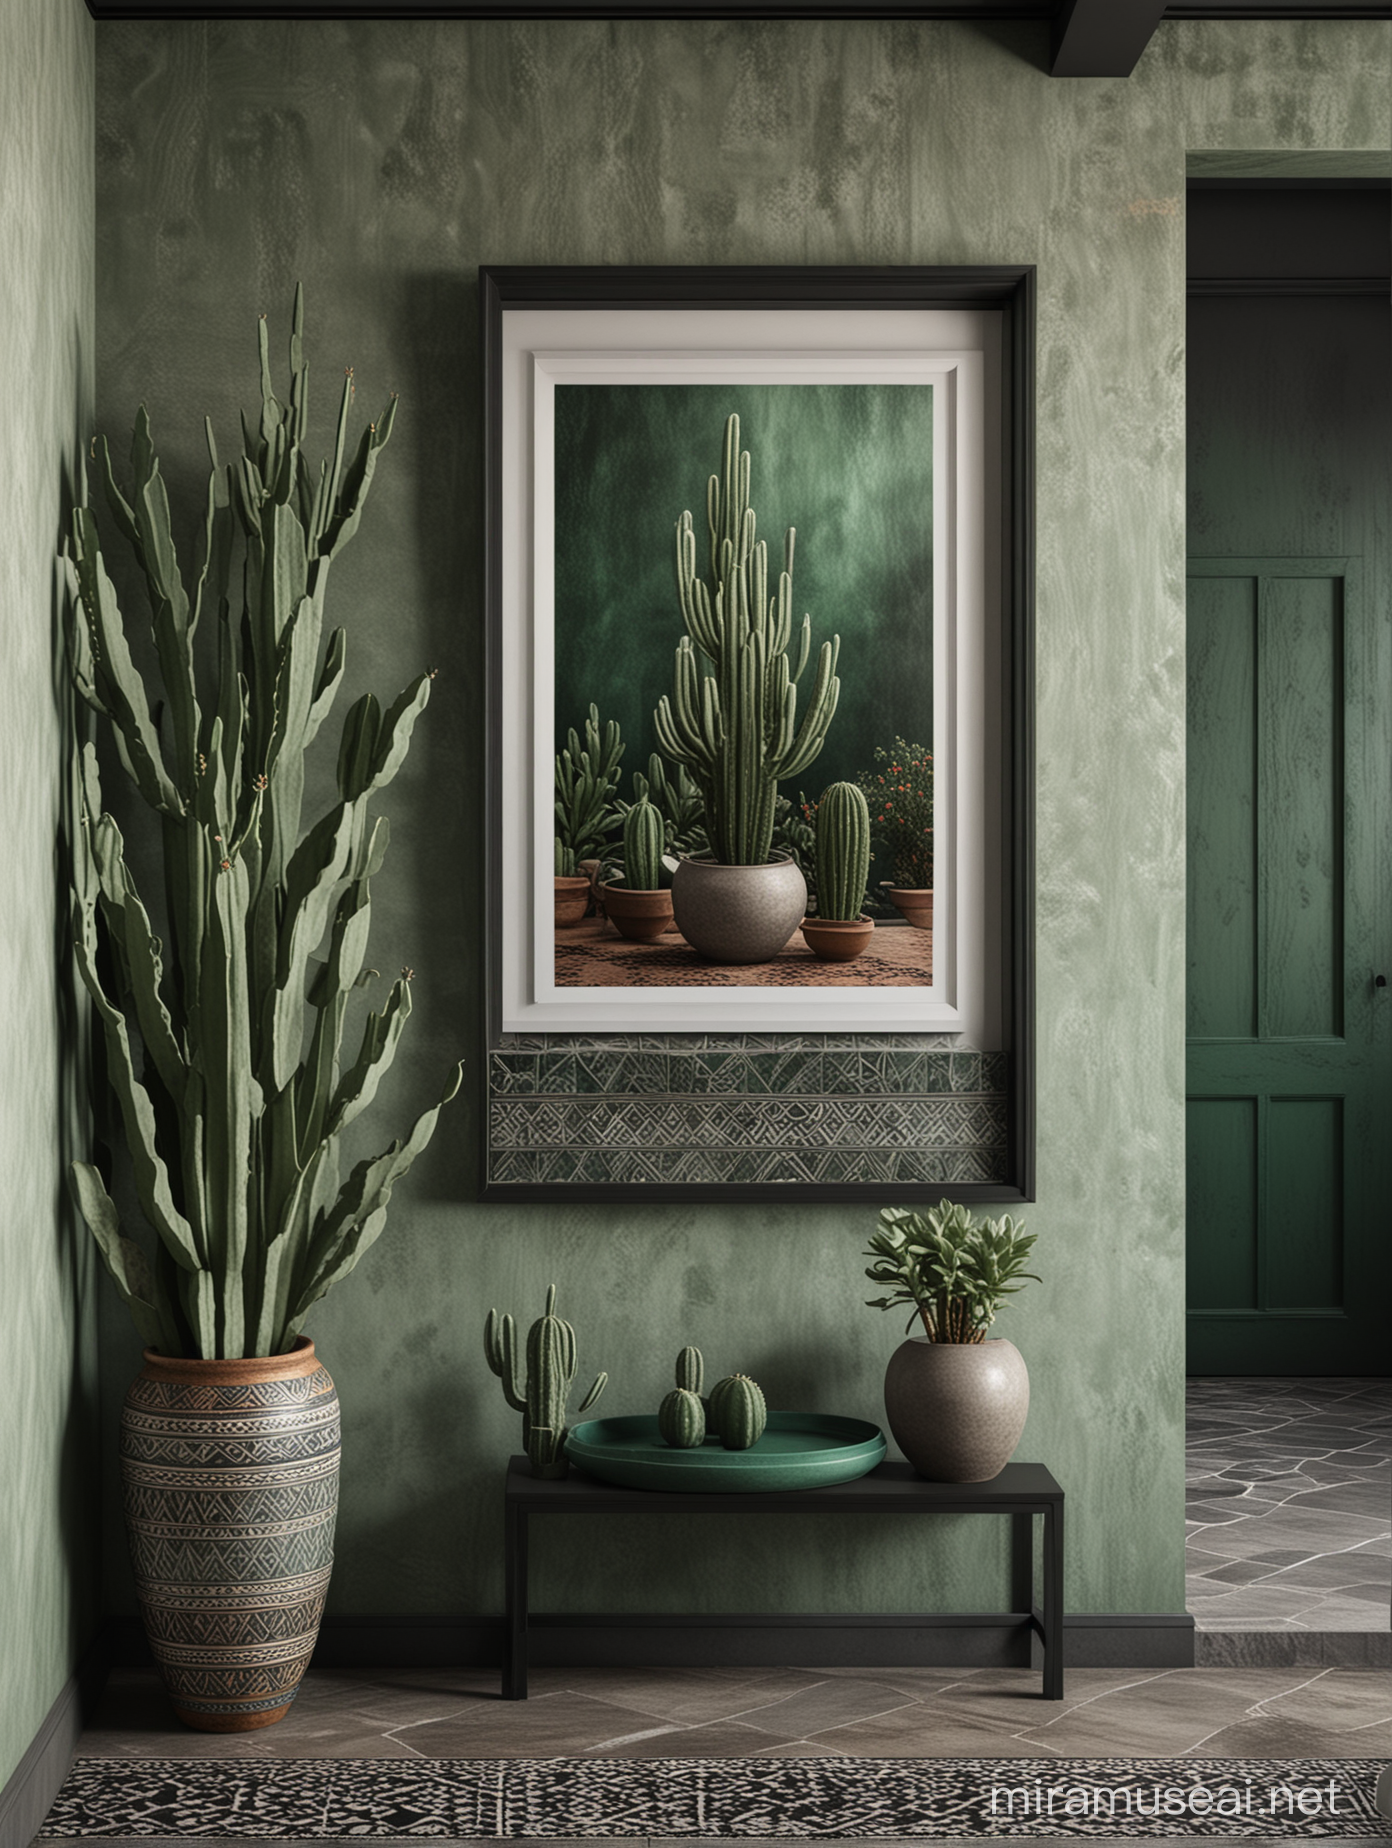 A gorgeous malachite green moroccan handmade style tiled wall contemporary close up framed black poster mockup with a minimal interior design including stairs and entrance hall, huge stone elements, including a contemporary Wabi Sabi huge vase in dark grey rustic finish as decoration with huge cactus, huge windows in the magazine style of ARCHITECTURAL DIGEST, a high quality architectural visualization, using 3D modeling software with photorealistic materials and advanced lighting techniques to showcase the intricate details and modern look of the room